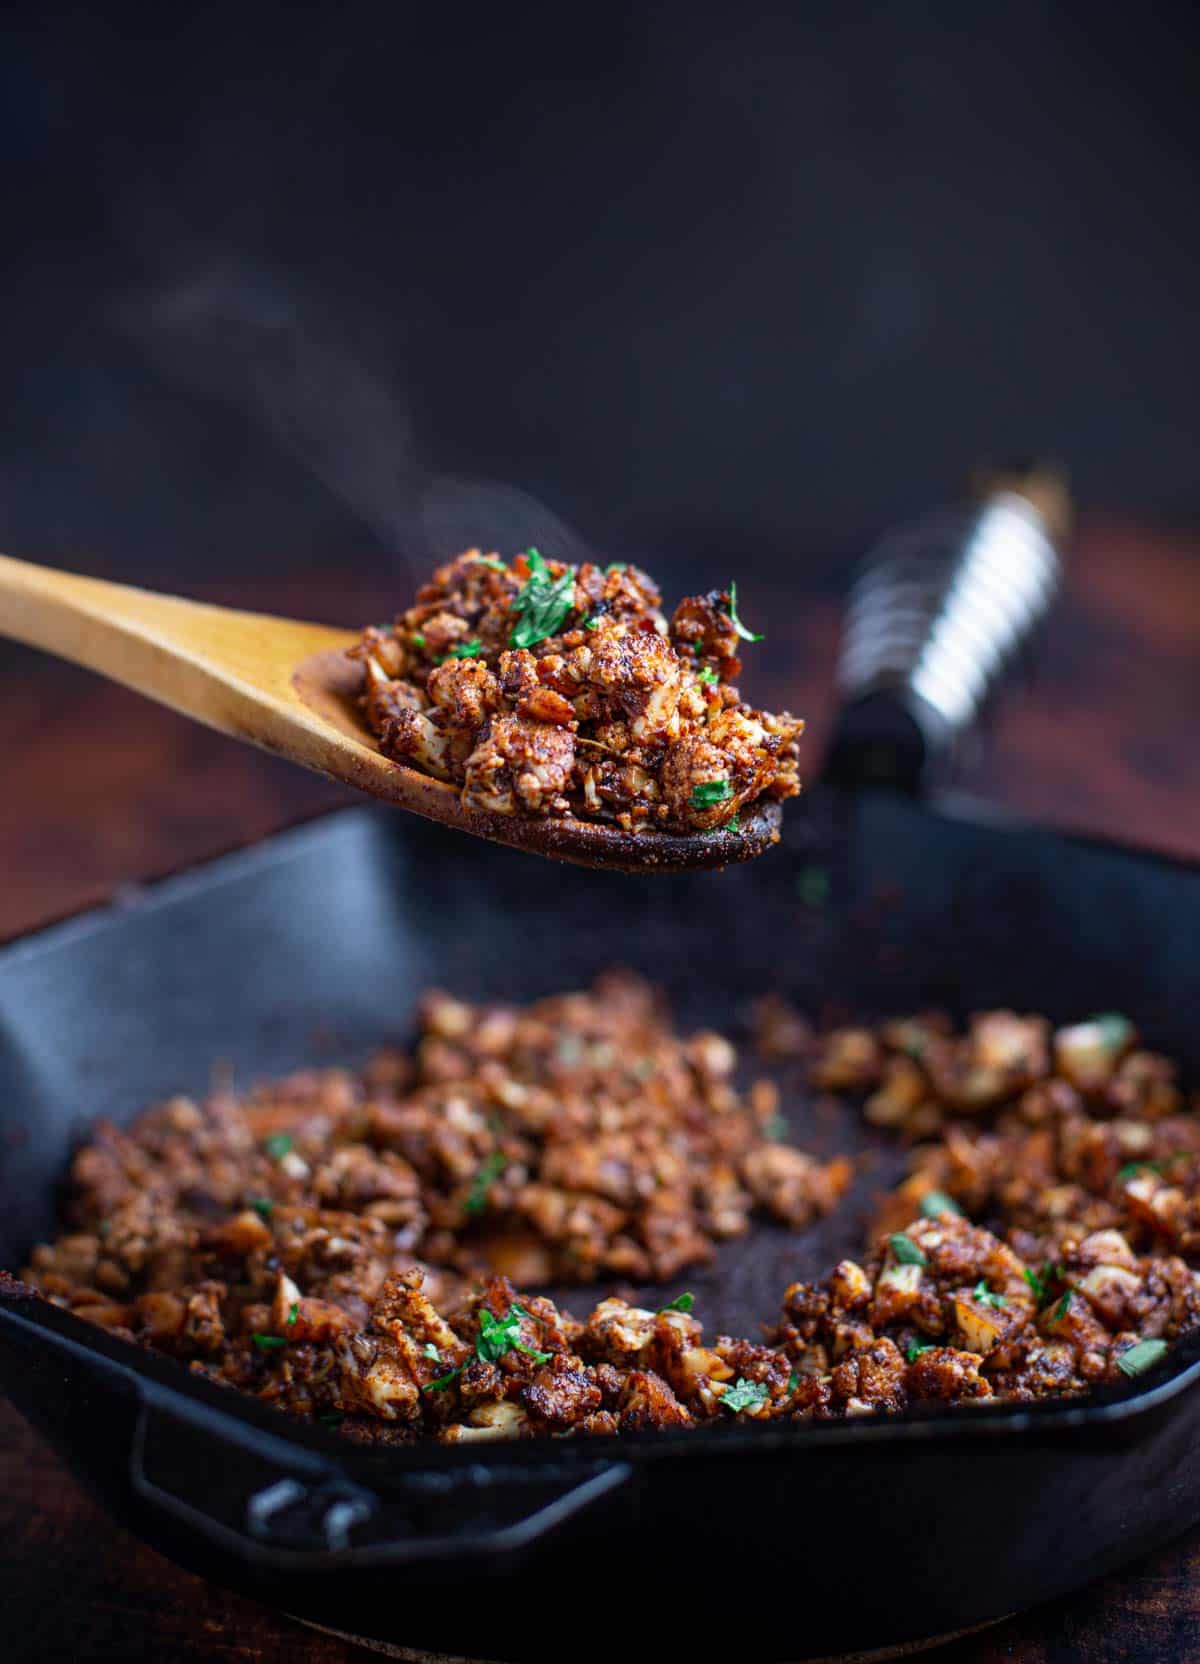 A wooden spoonful of Cauliflower Chorizo topped with parsley taken from a cast iron pan.